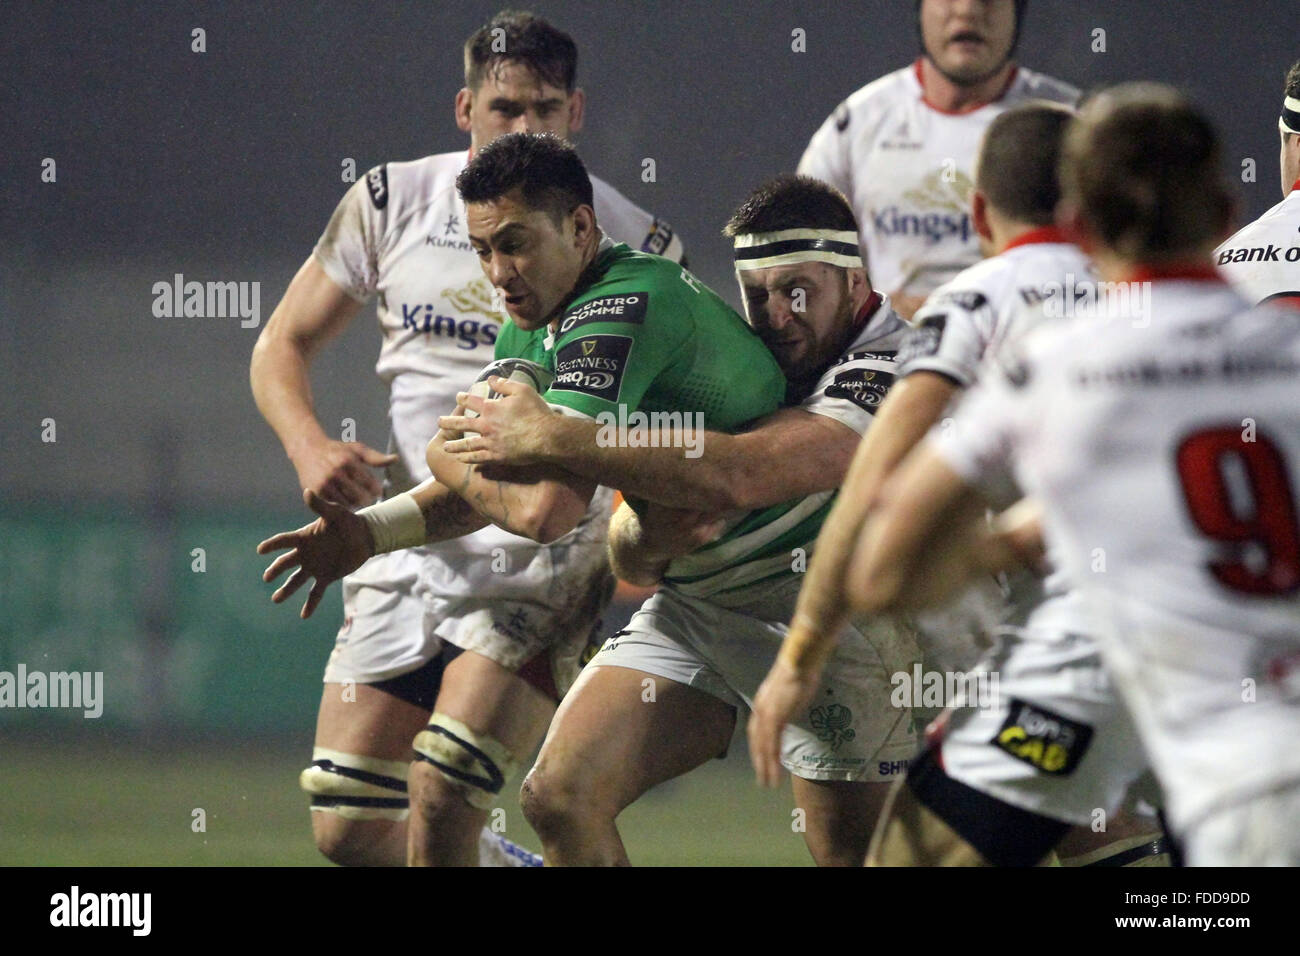 Treviso, Italy. 30th January, 2016. Treviso's player Sam Christie fights for the ball during Rugby Guinness Pro12 match  between Benetton Treviso and Ulster on 30th January, 2016. Credit:  Andrea Spinelli/Alamy Live News Stock Photo